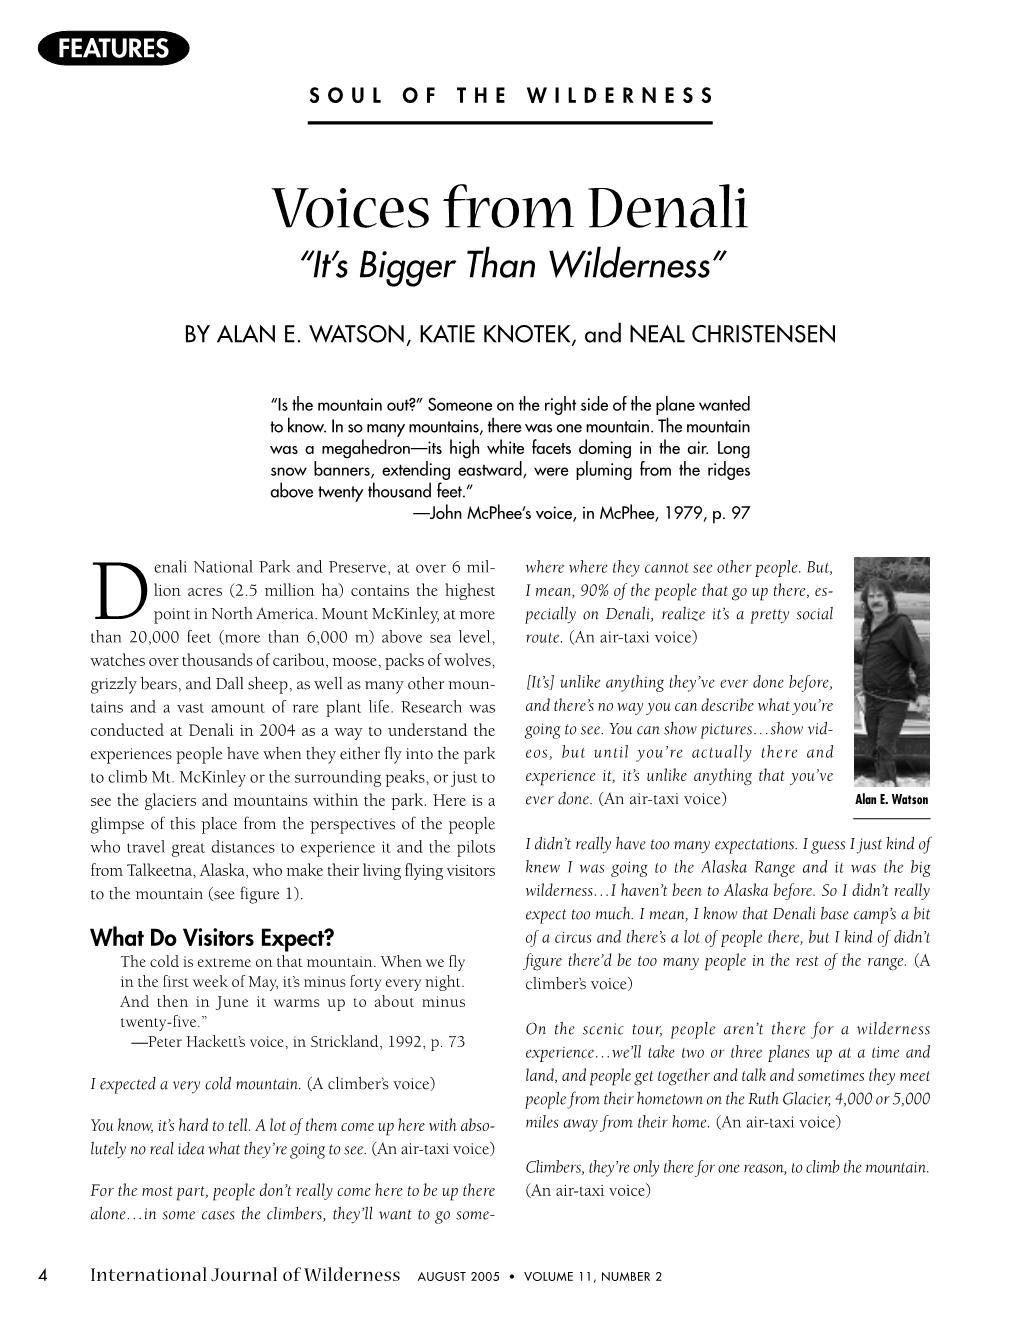 Voices from Denali “It’S Bigger Than Wilderness”